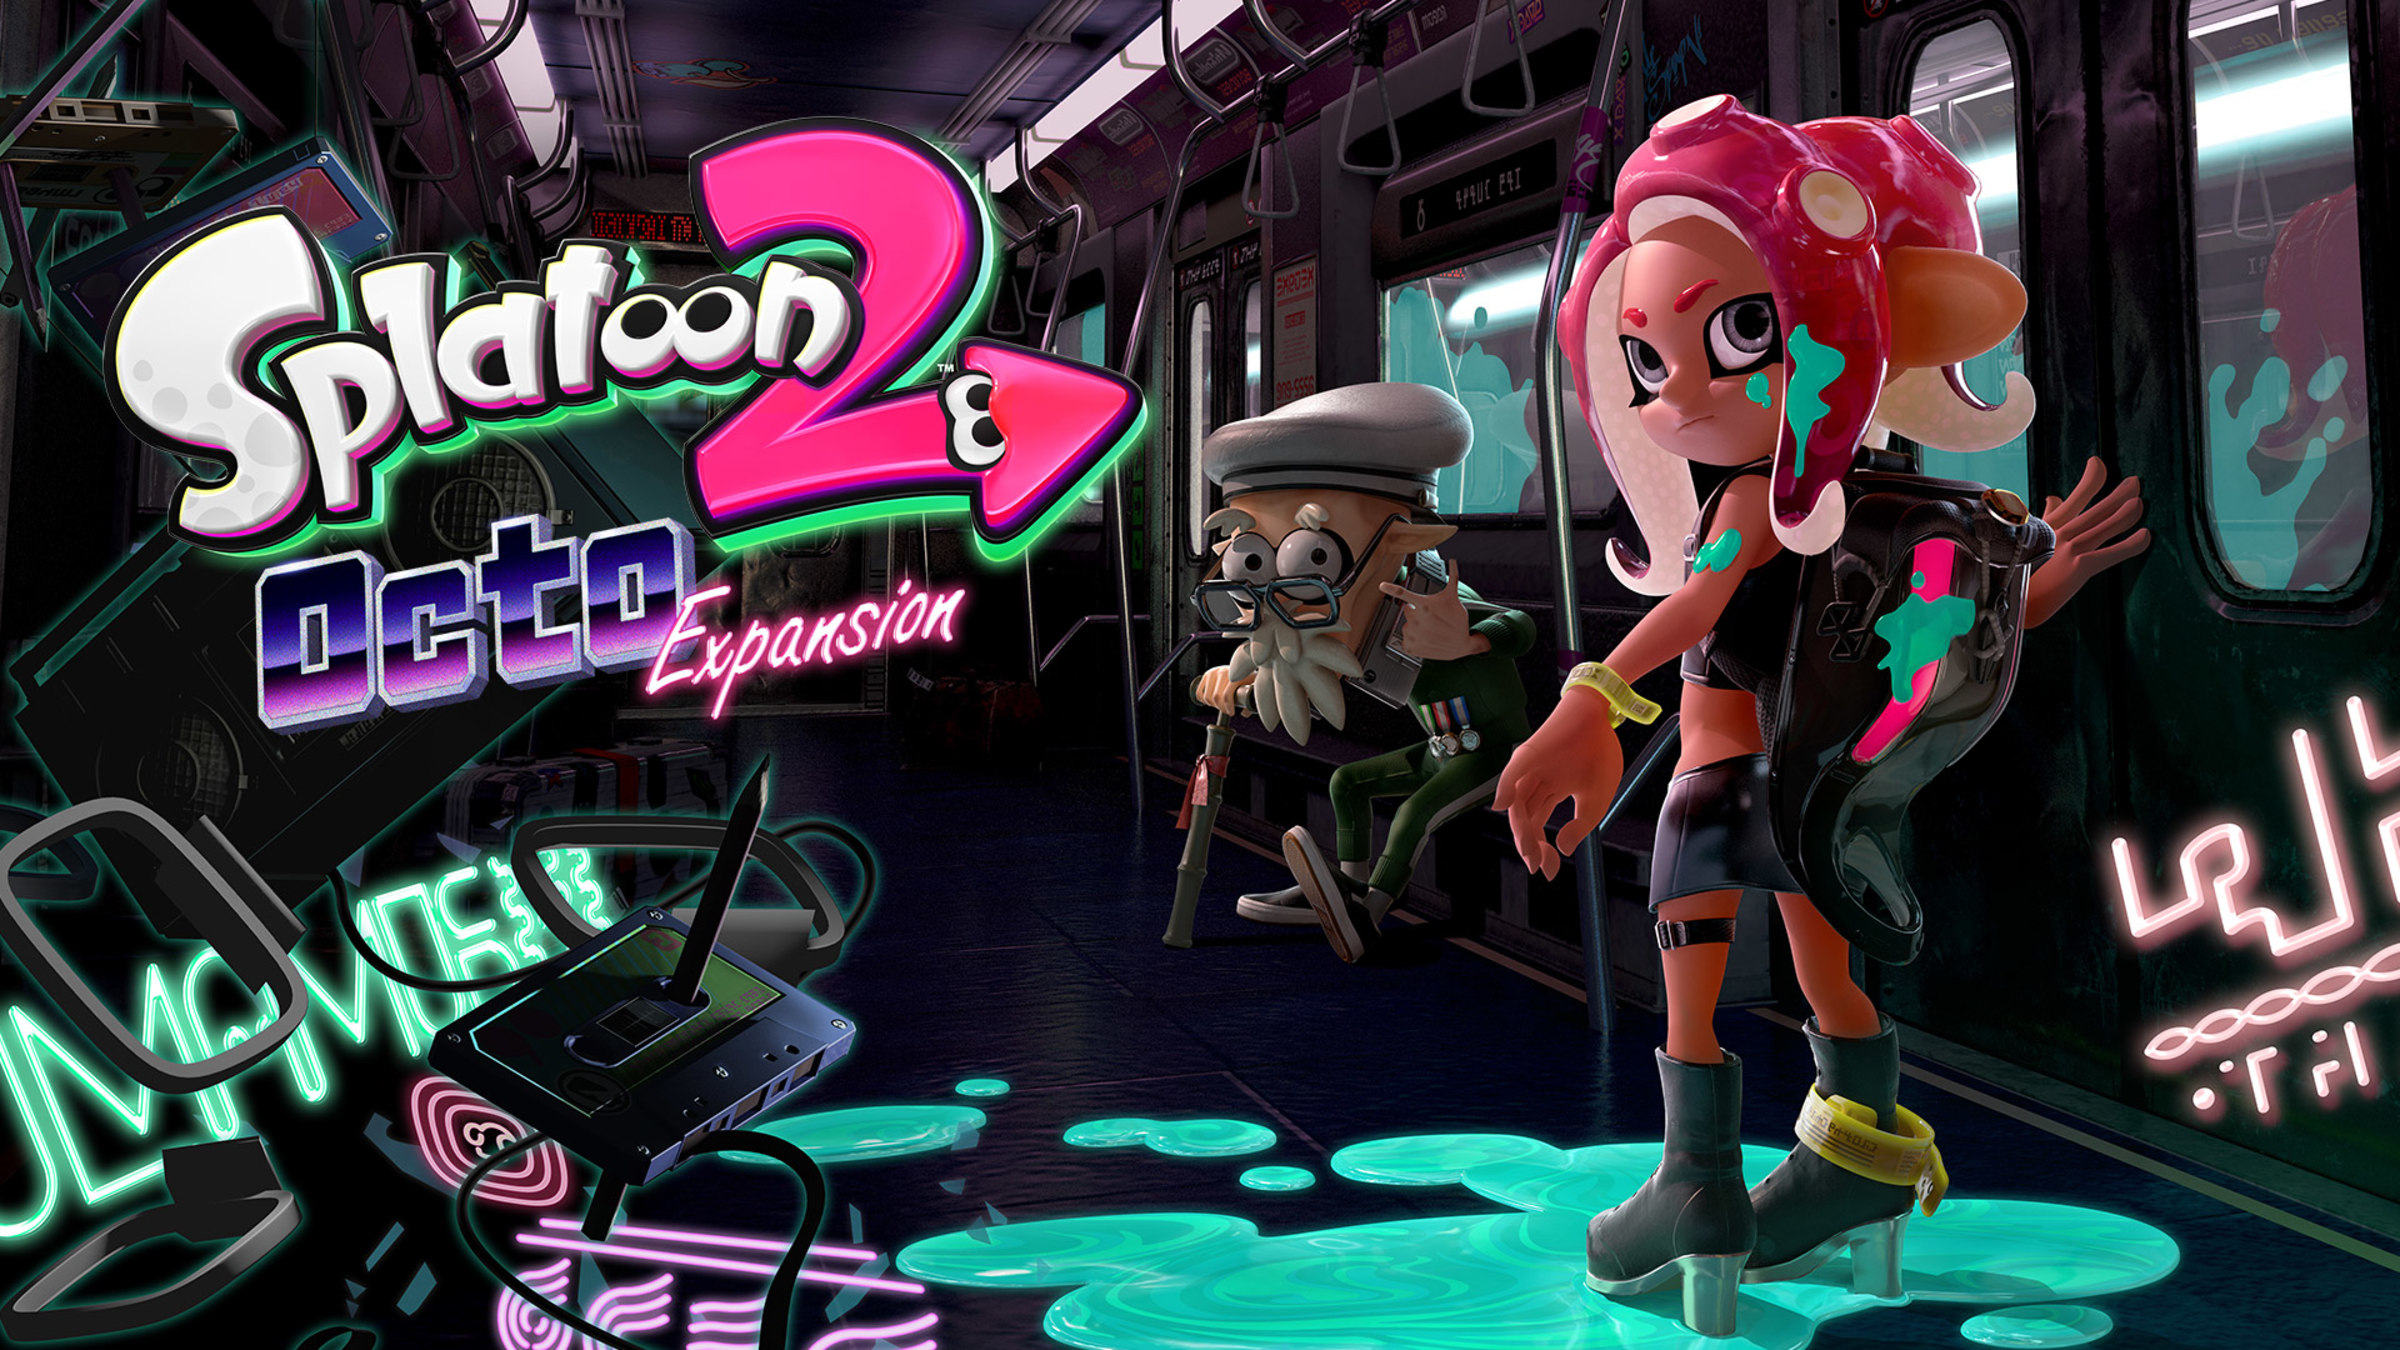 Official Site Nintendo 2: Octo Switch - Expansion Nintendo for Splatoon™